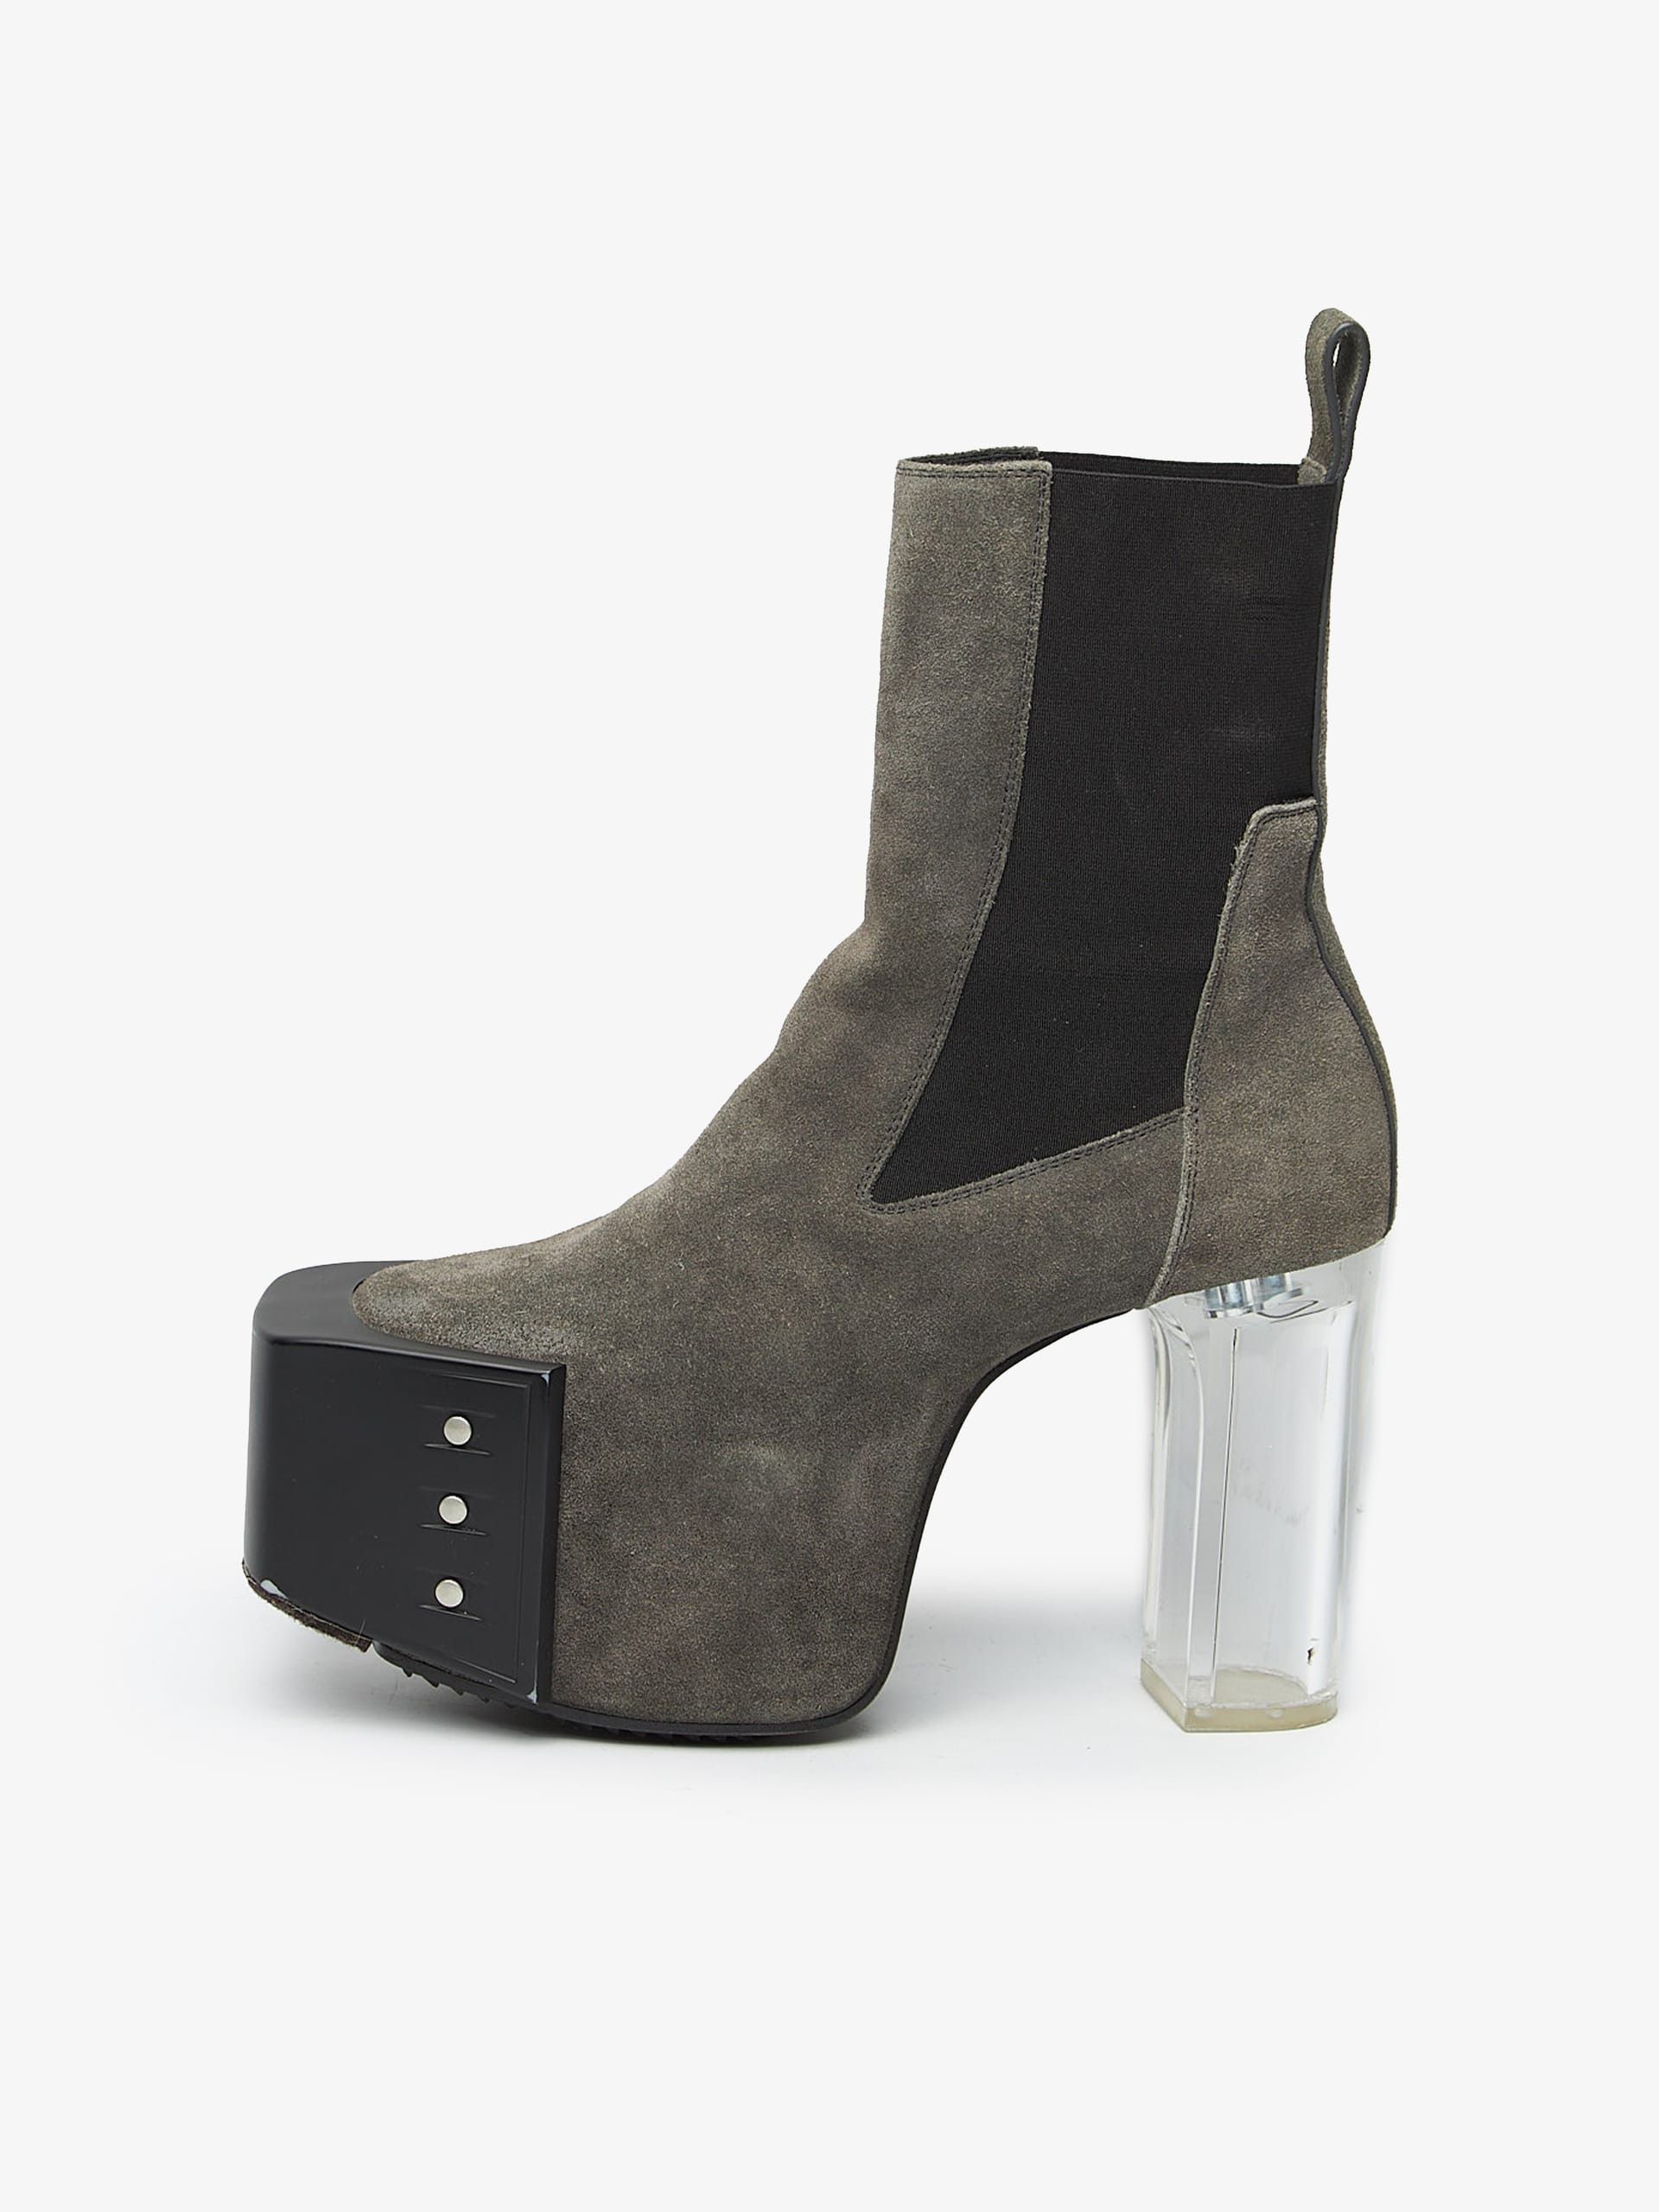 Rick Owens Gray Suede Kiss Suede Heel Boots | Grailed